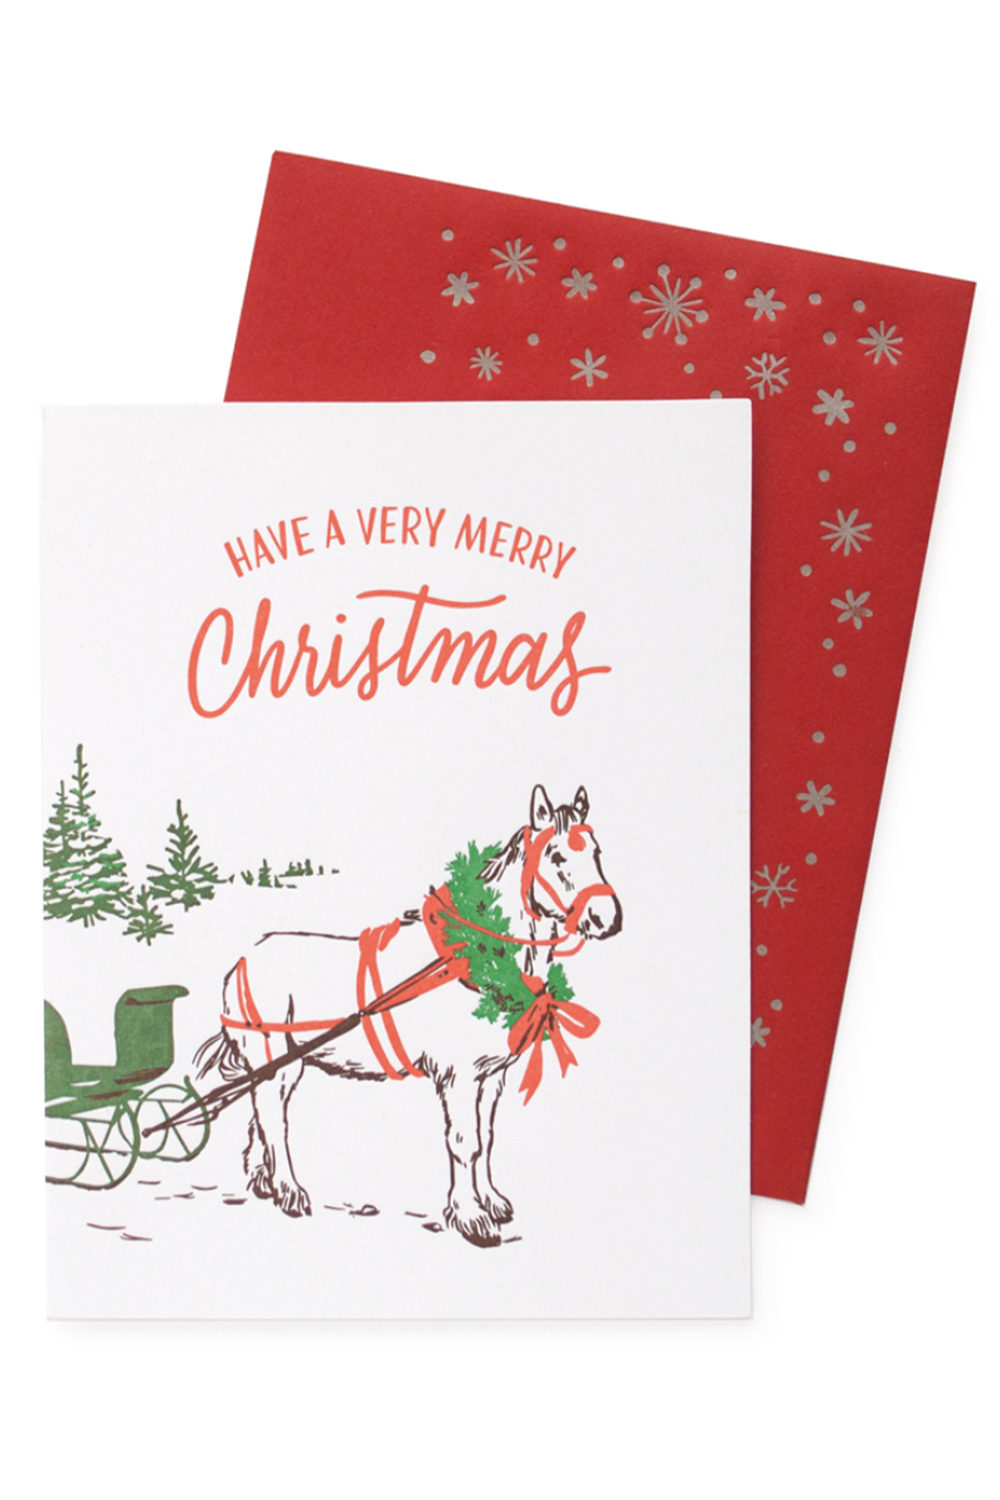 Smudgey Holiday Greeting Card - Horse and Sleigh